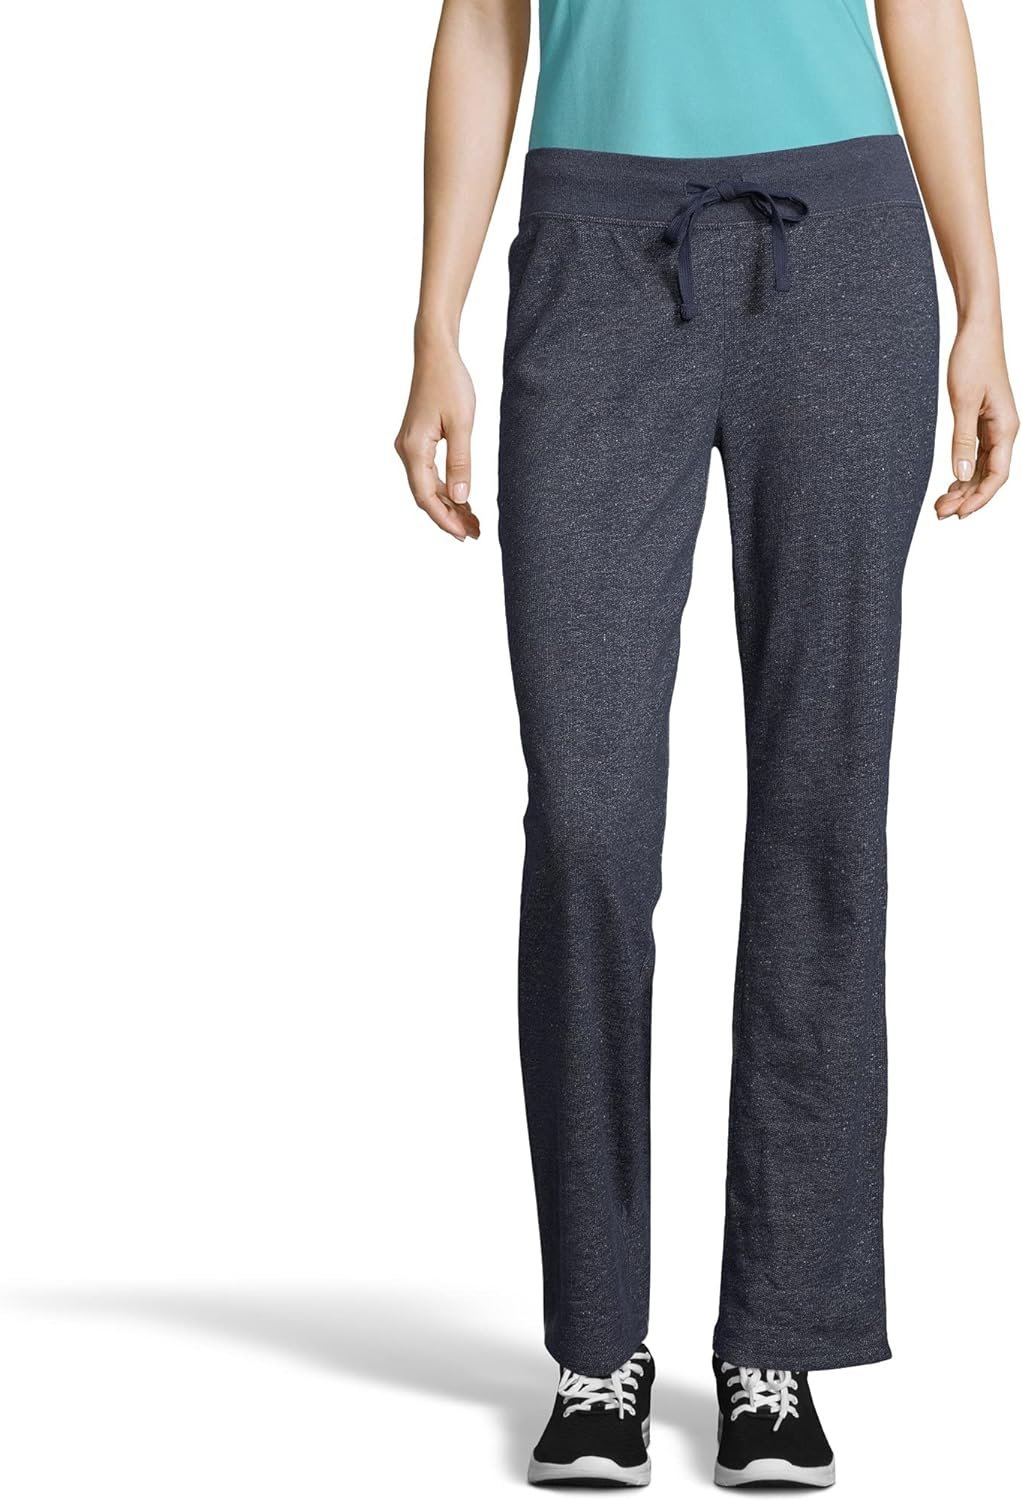 Hanes Womens French Terry Pant